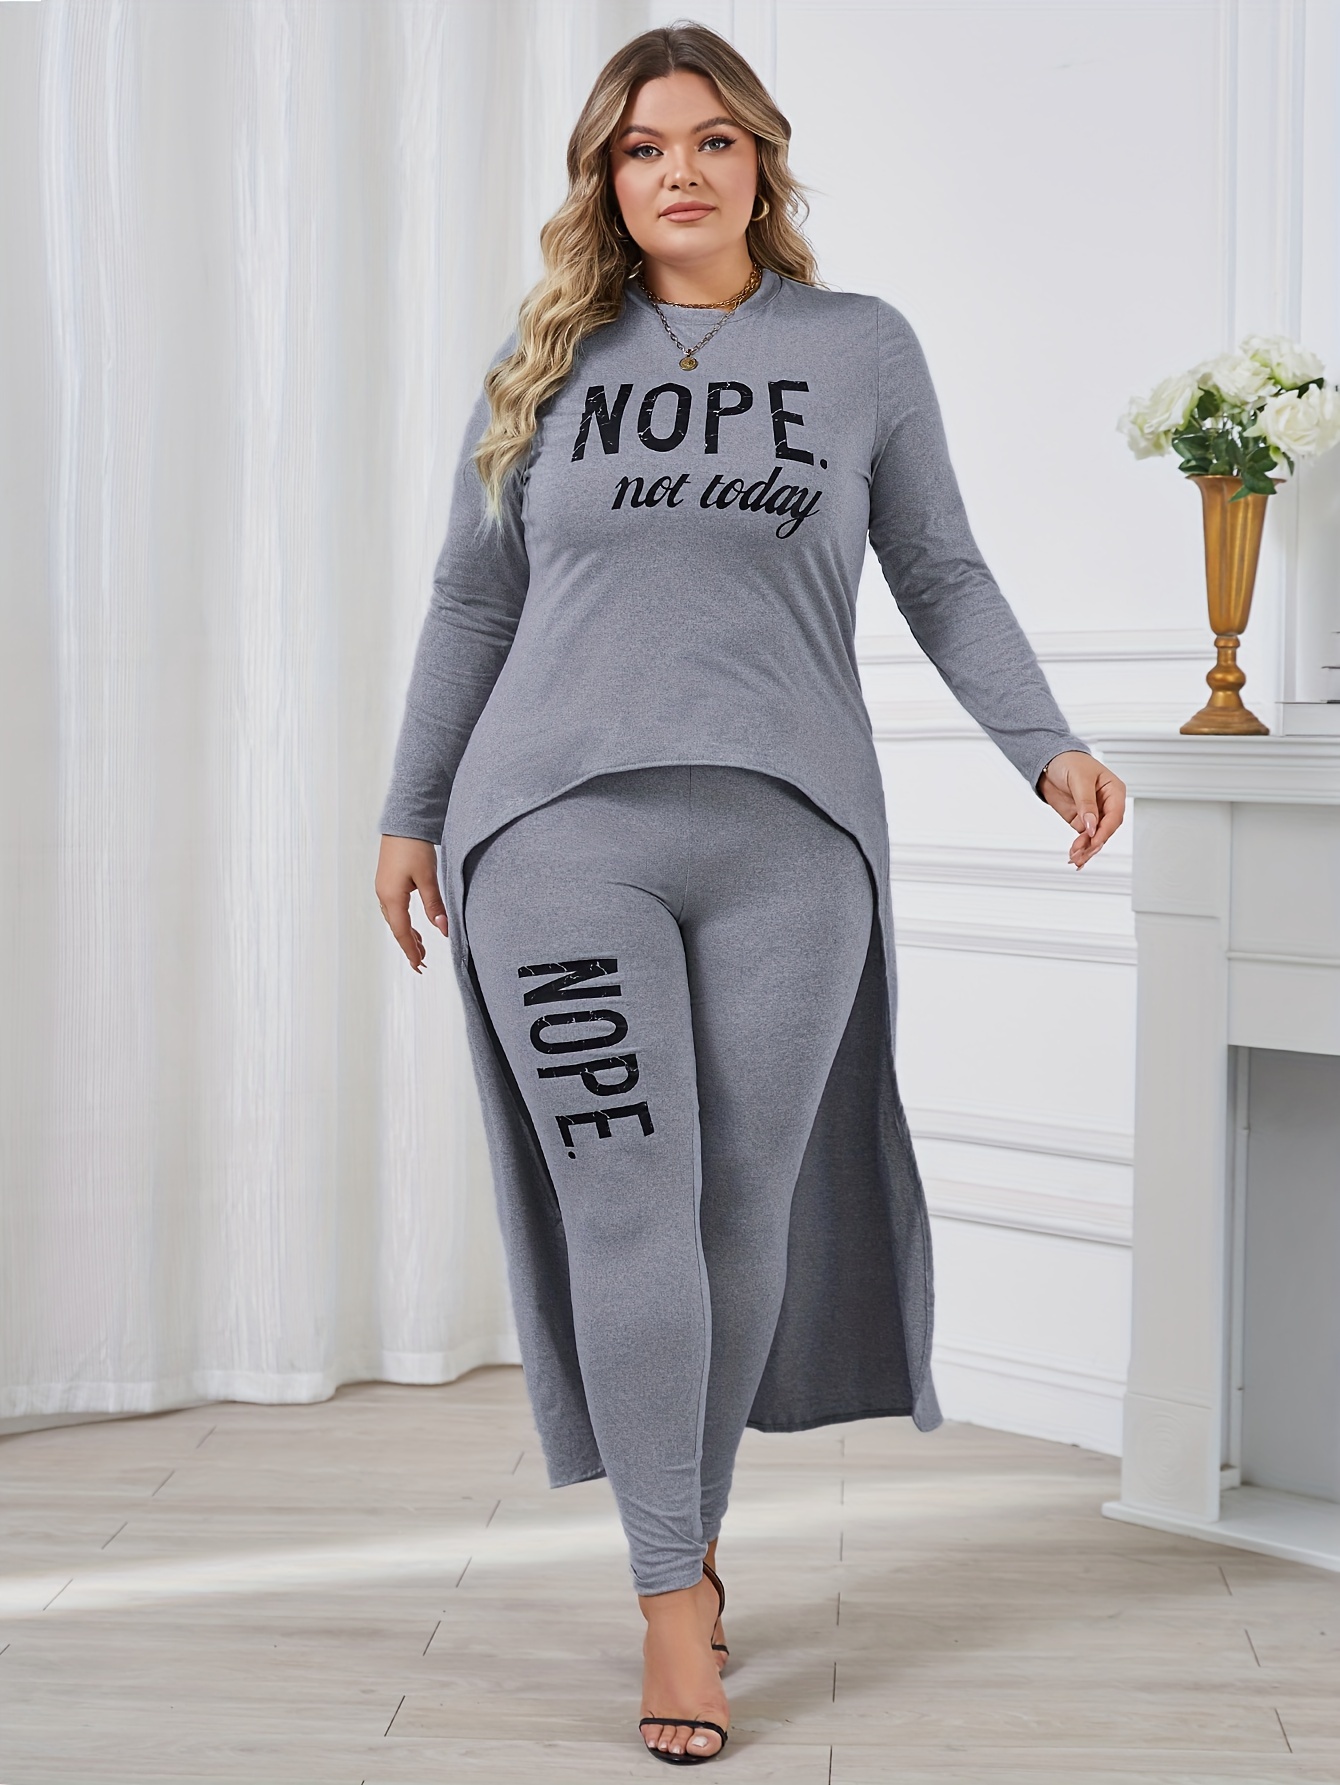 Women's Casual Unbalance Top And Matching Leggings Sets Plus Size Curvy 1X  2X 3X 